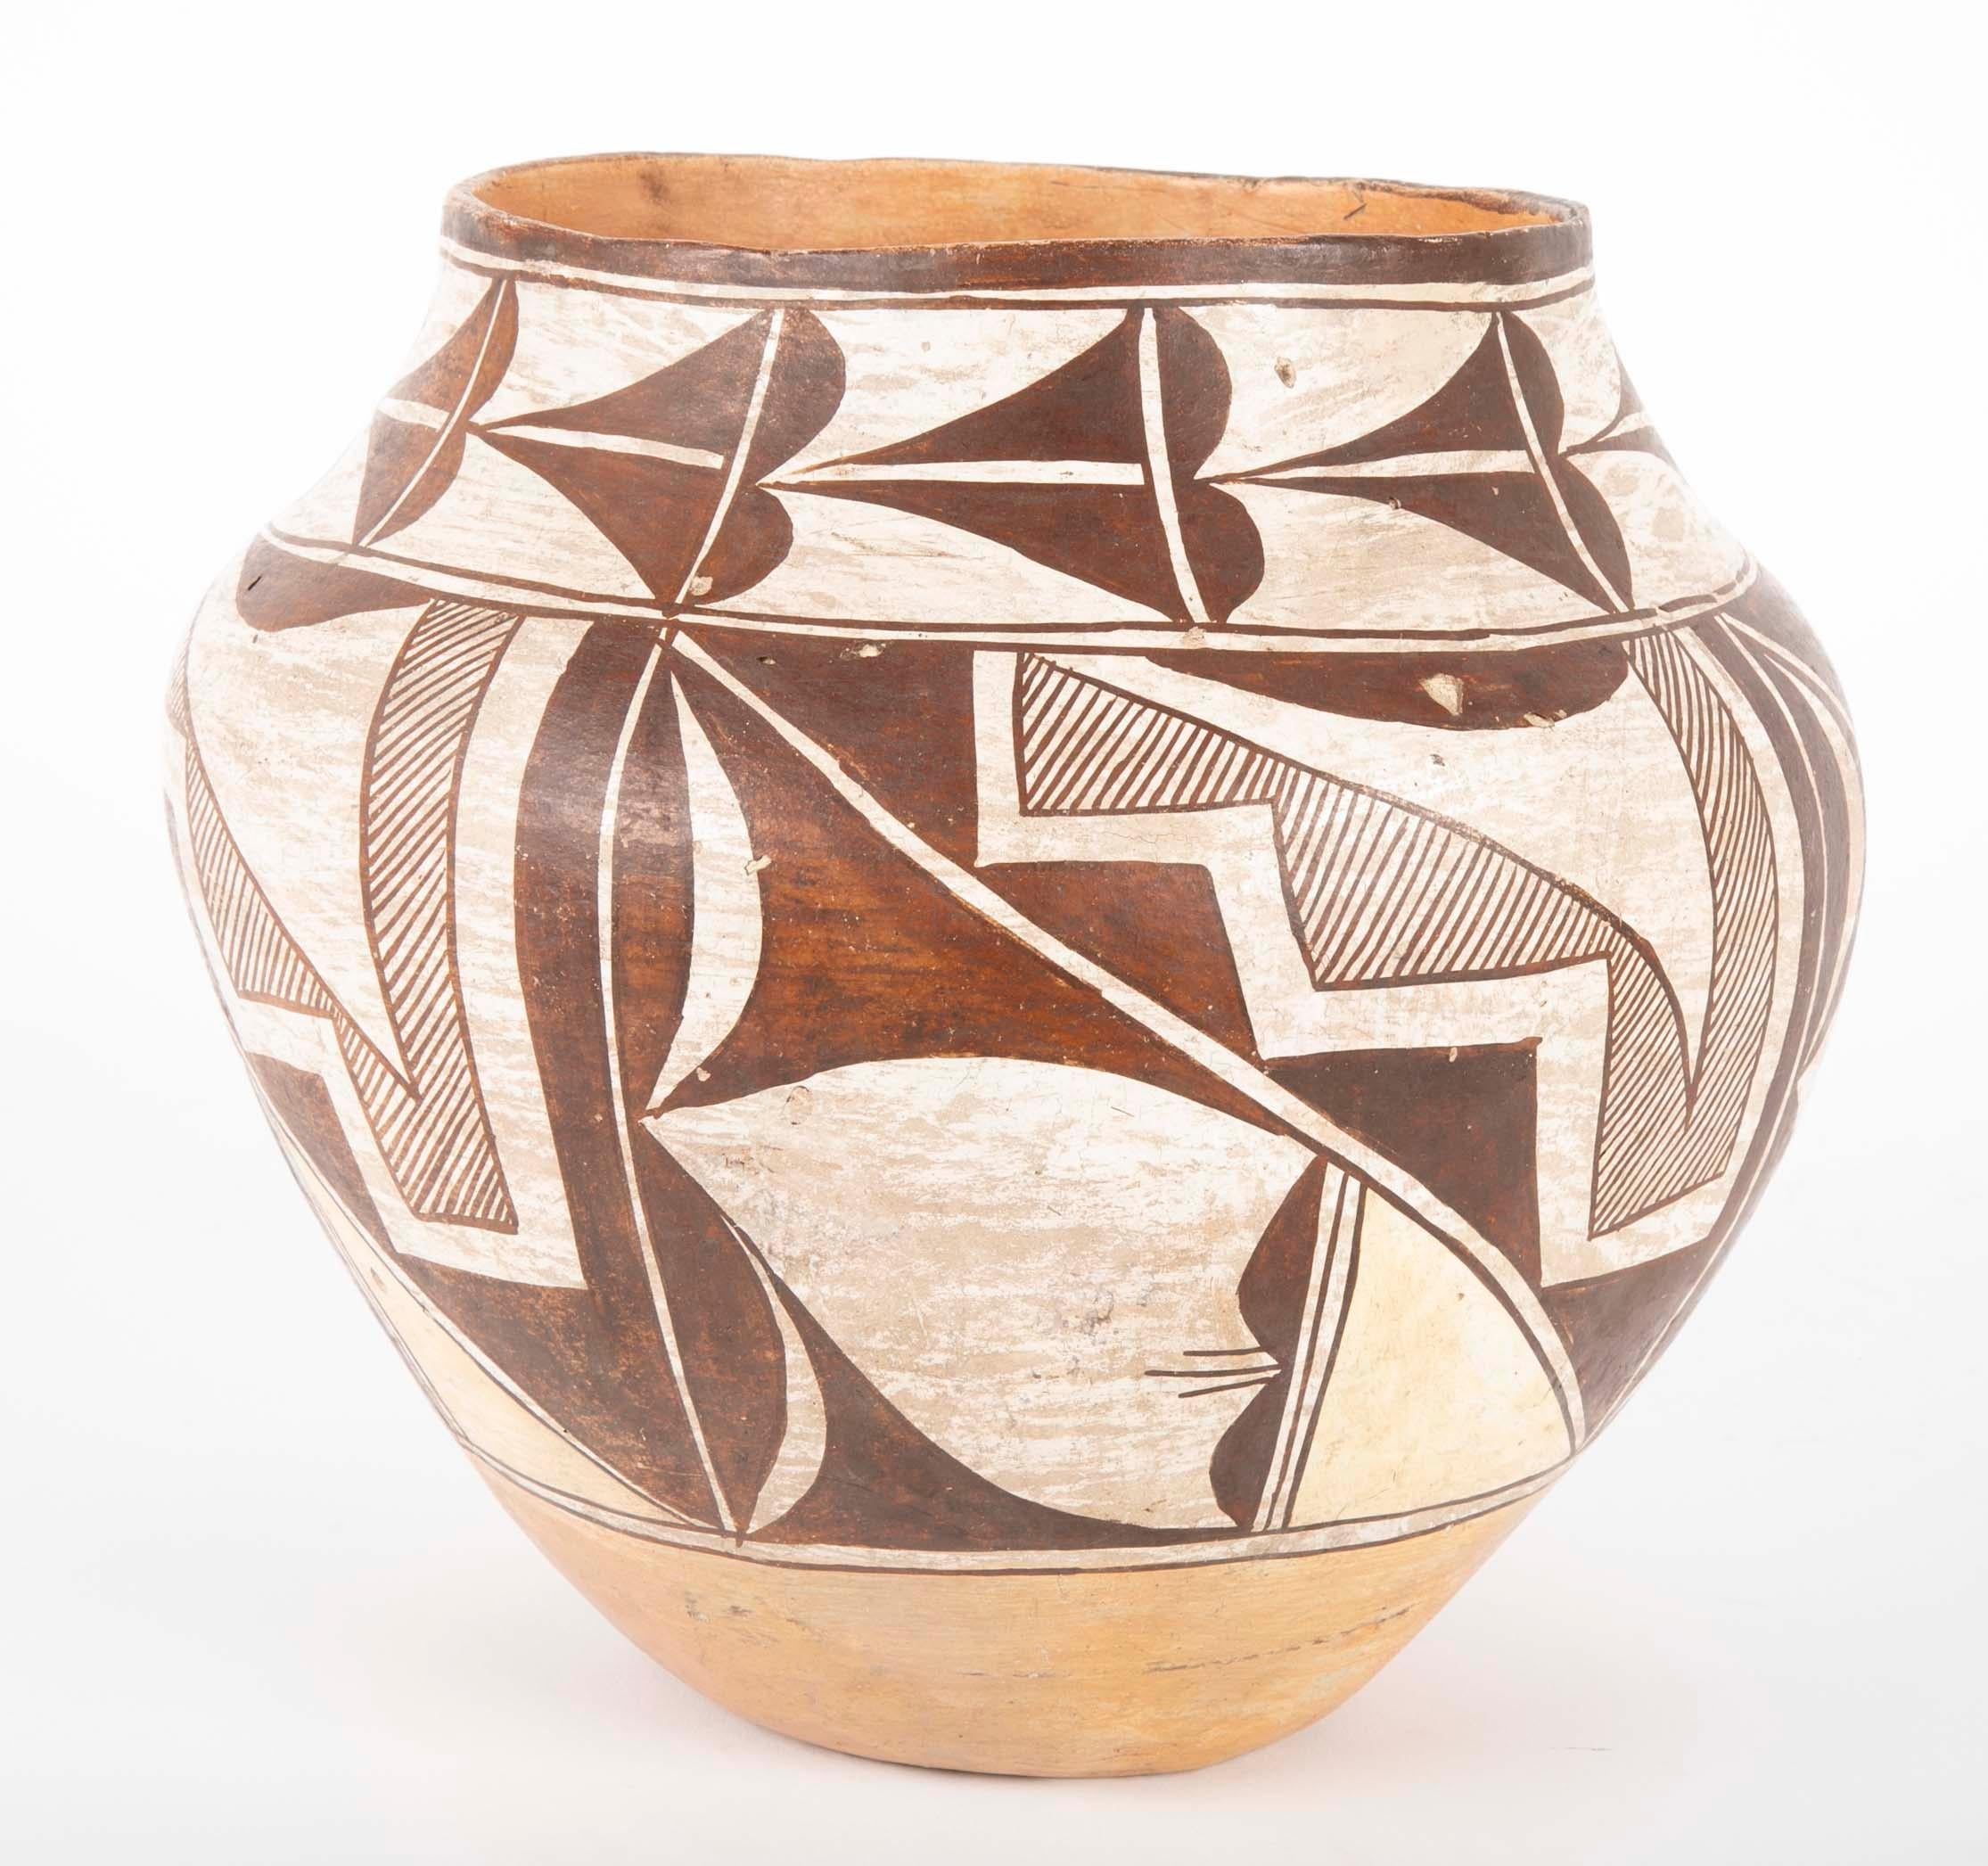 American An Acoma Ceramic Vase from the Second Quarter of the 20th Century